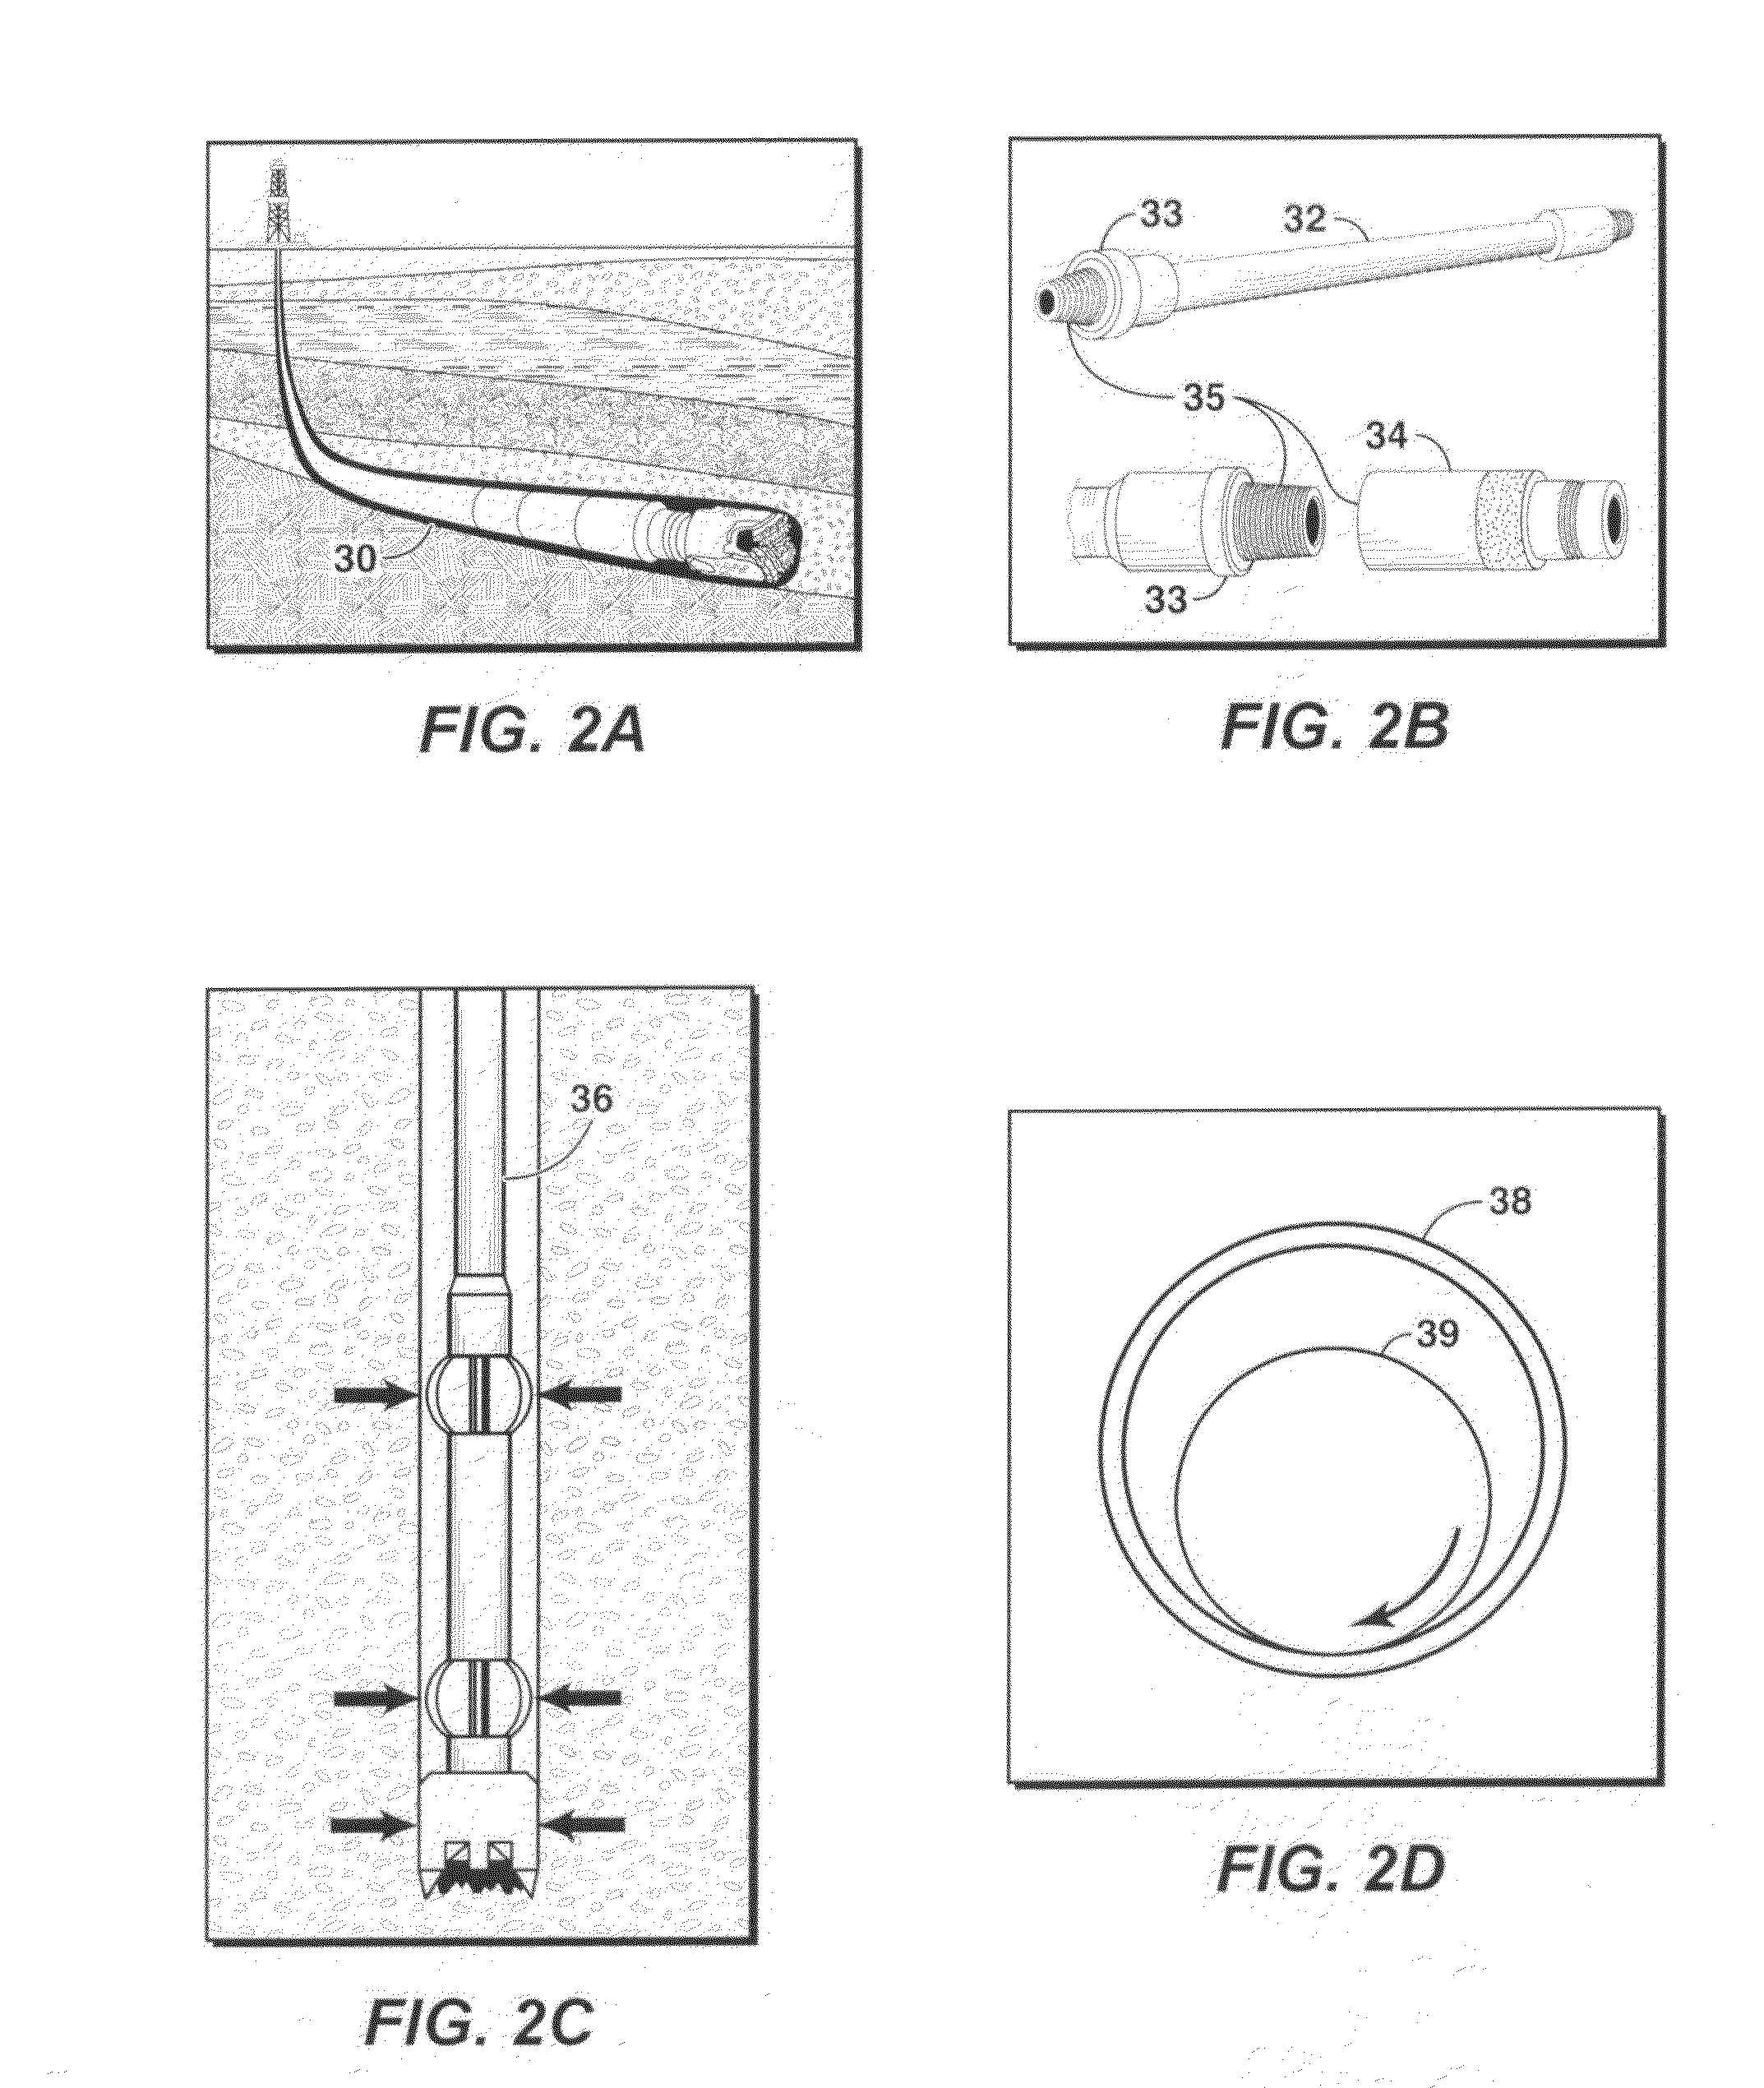 Coated sleeved oil and gas well production devices